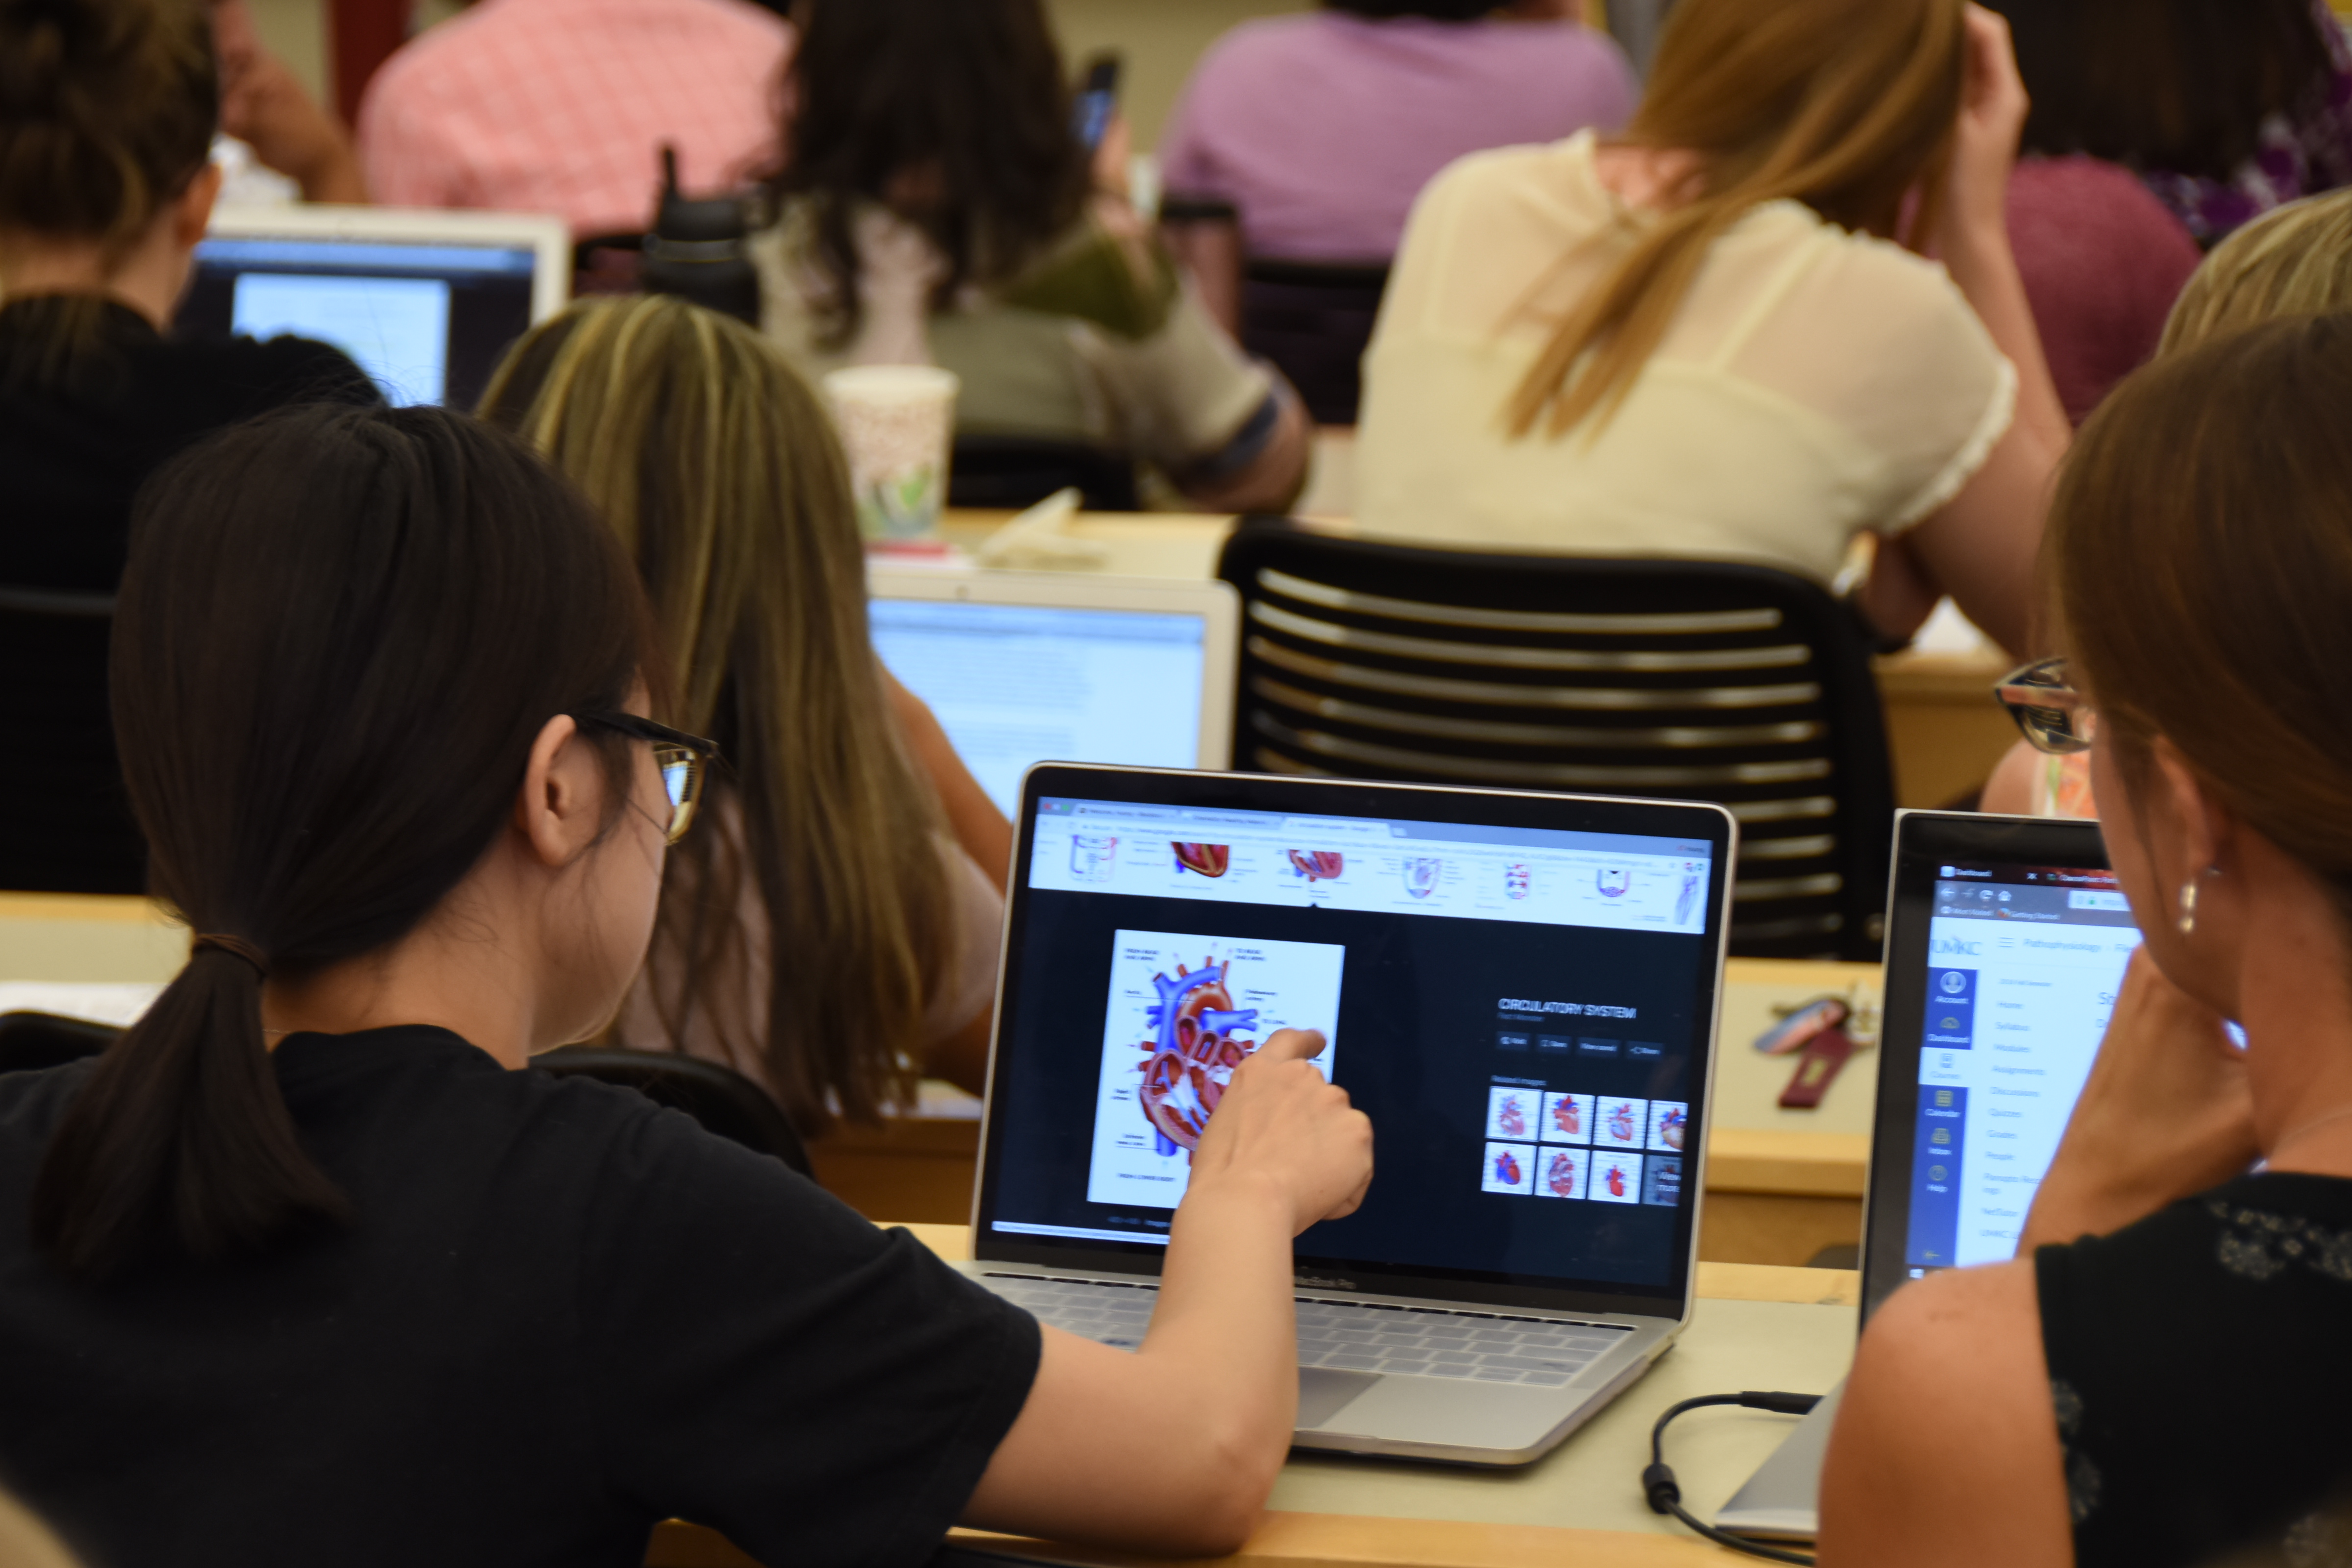 Nursing students viewing anatomy of human heart on computer screen